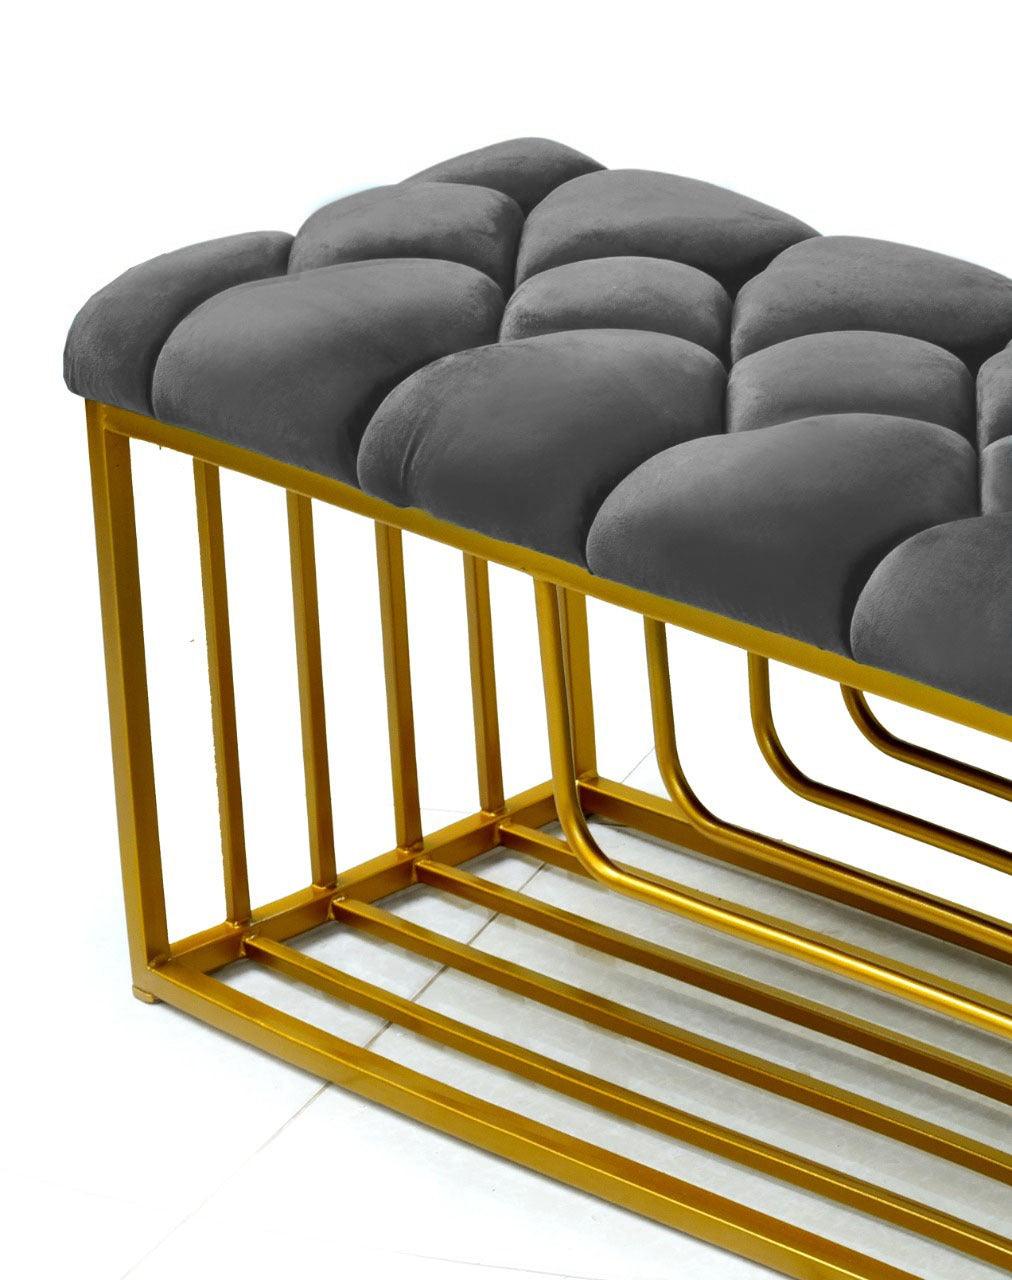 Luxury 3 Seater Stool With Shoe Rack -1044 - 92Bedding